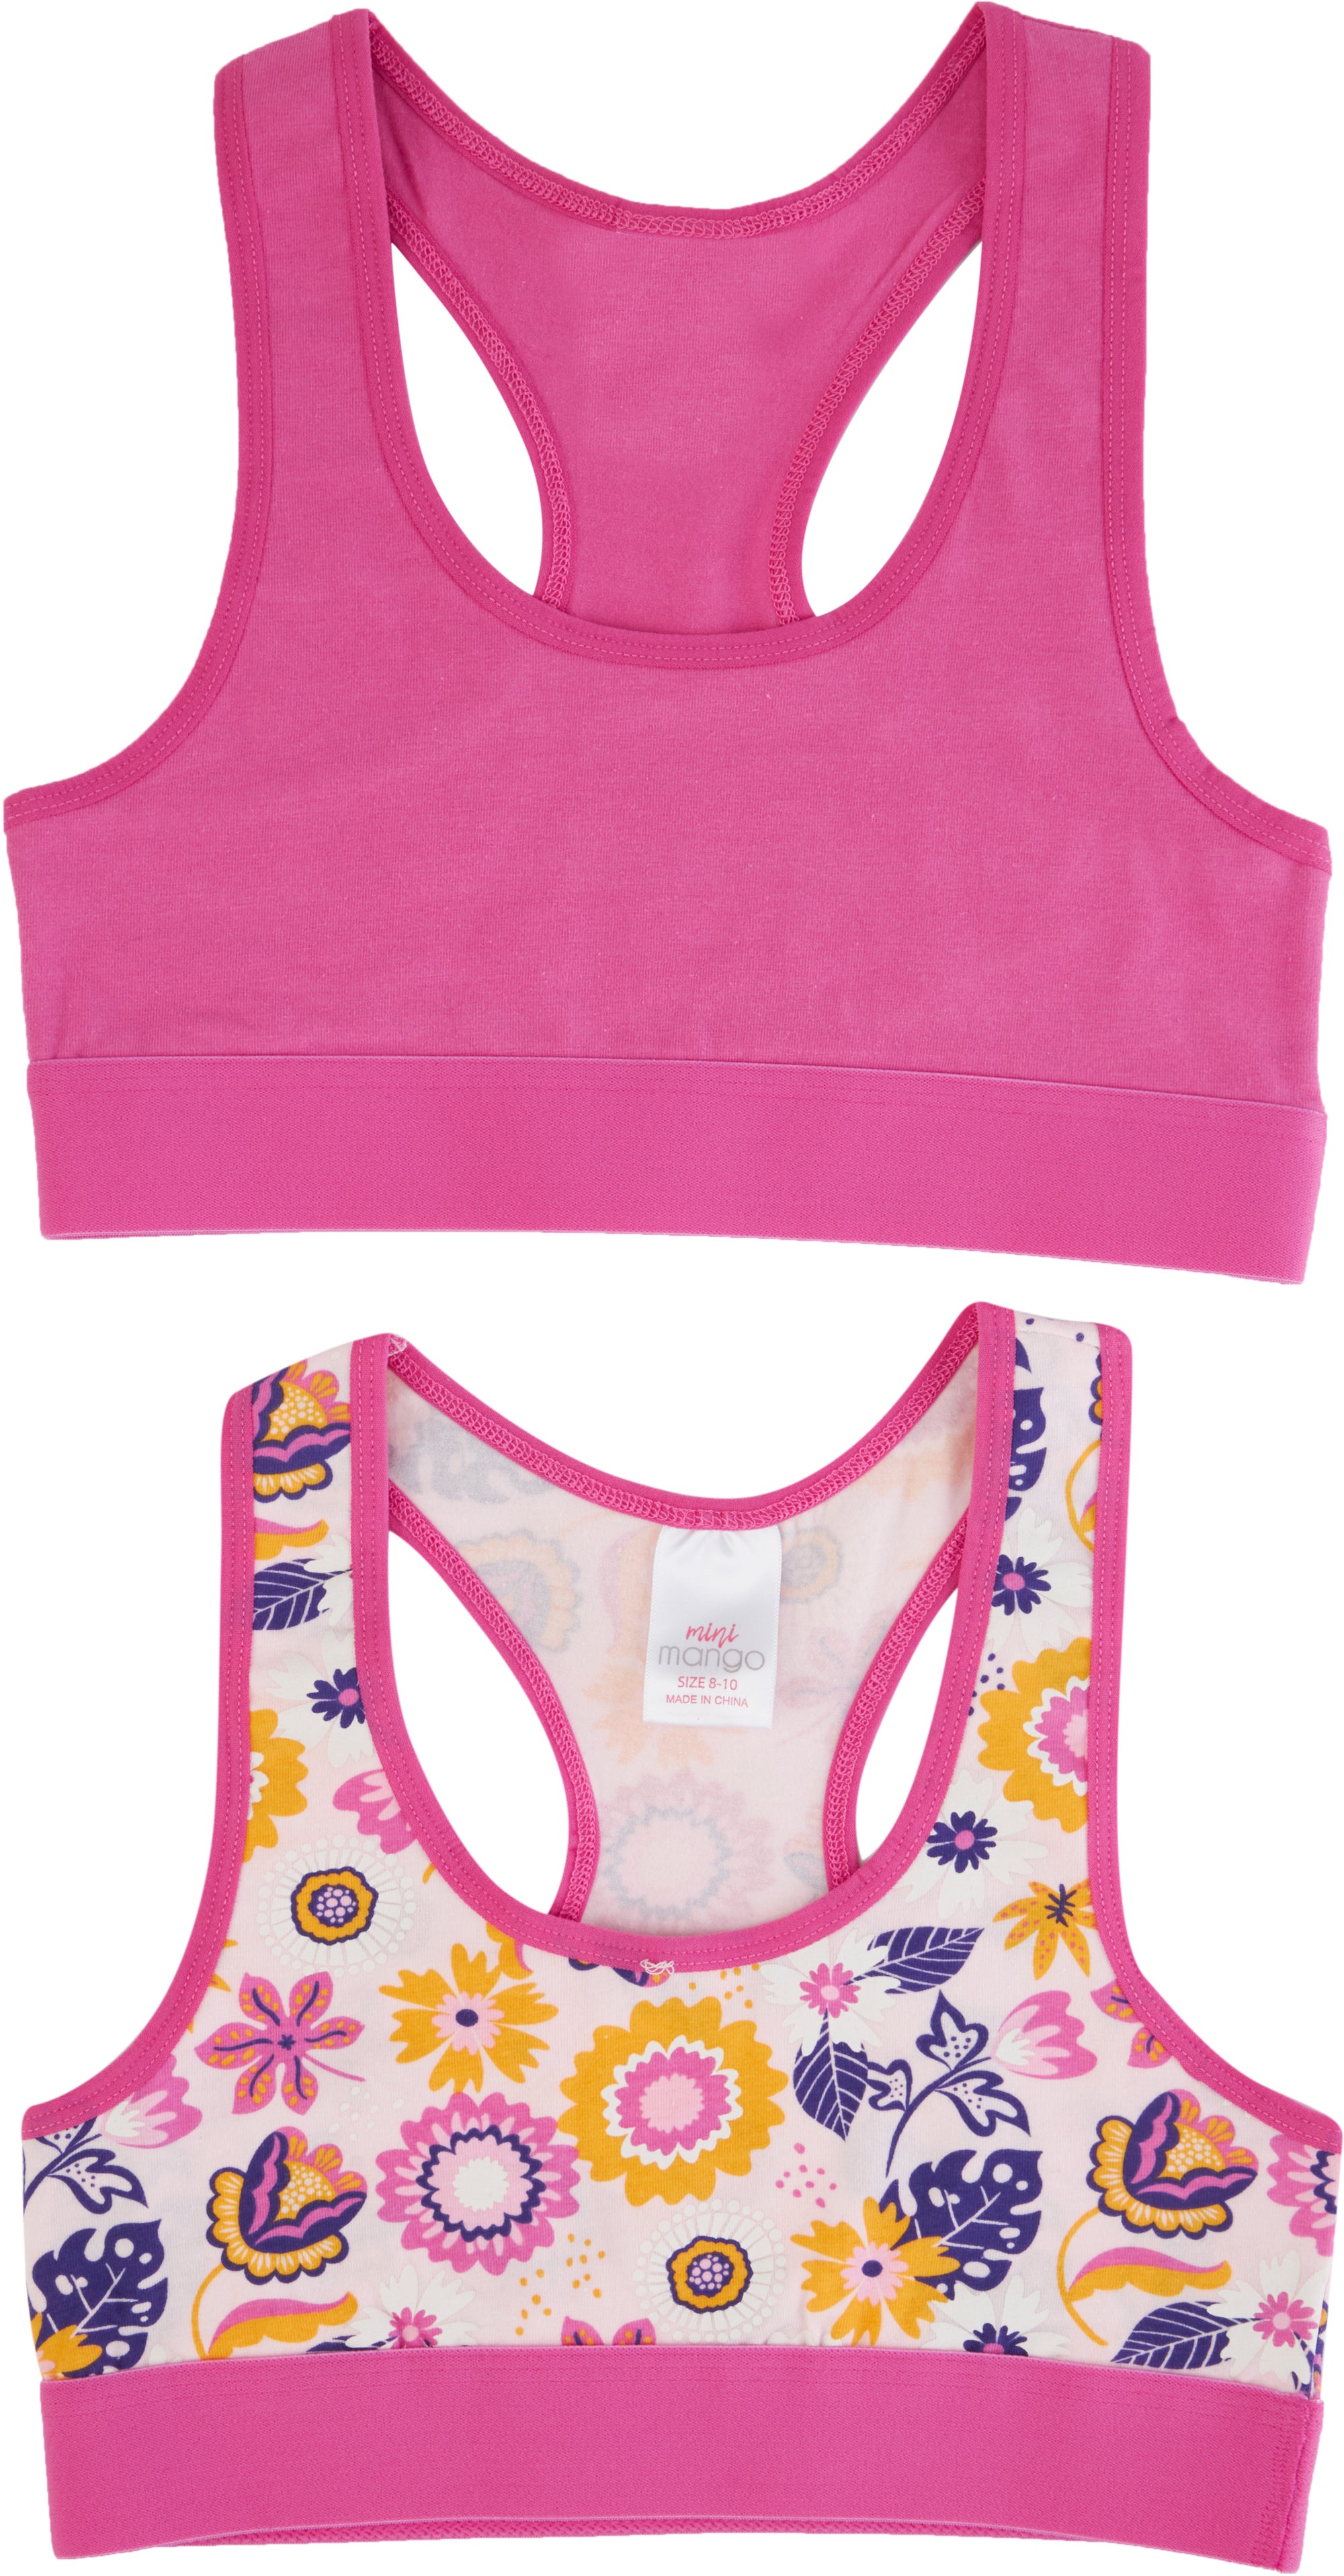 Girls' 2 Pack Fashion Crop in Tropical/pink